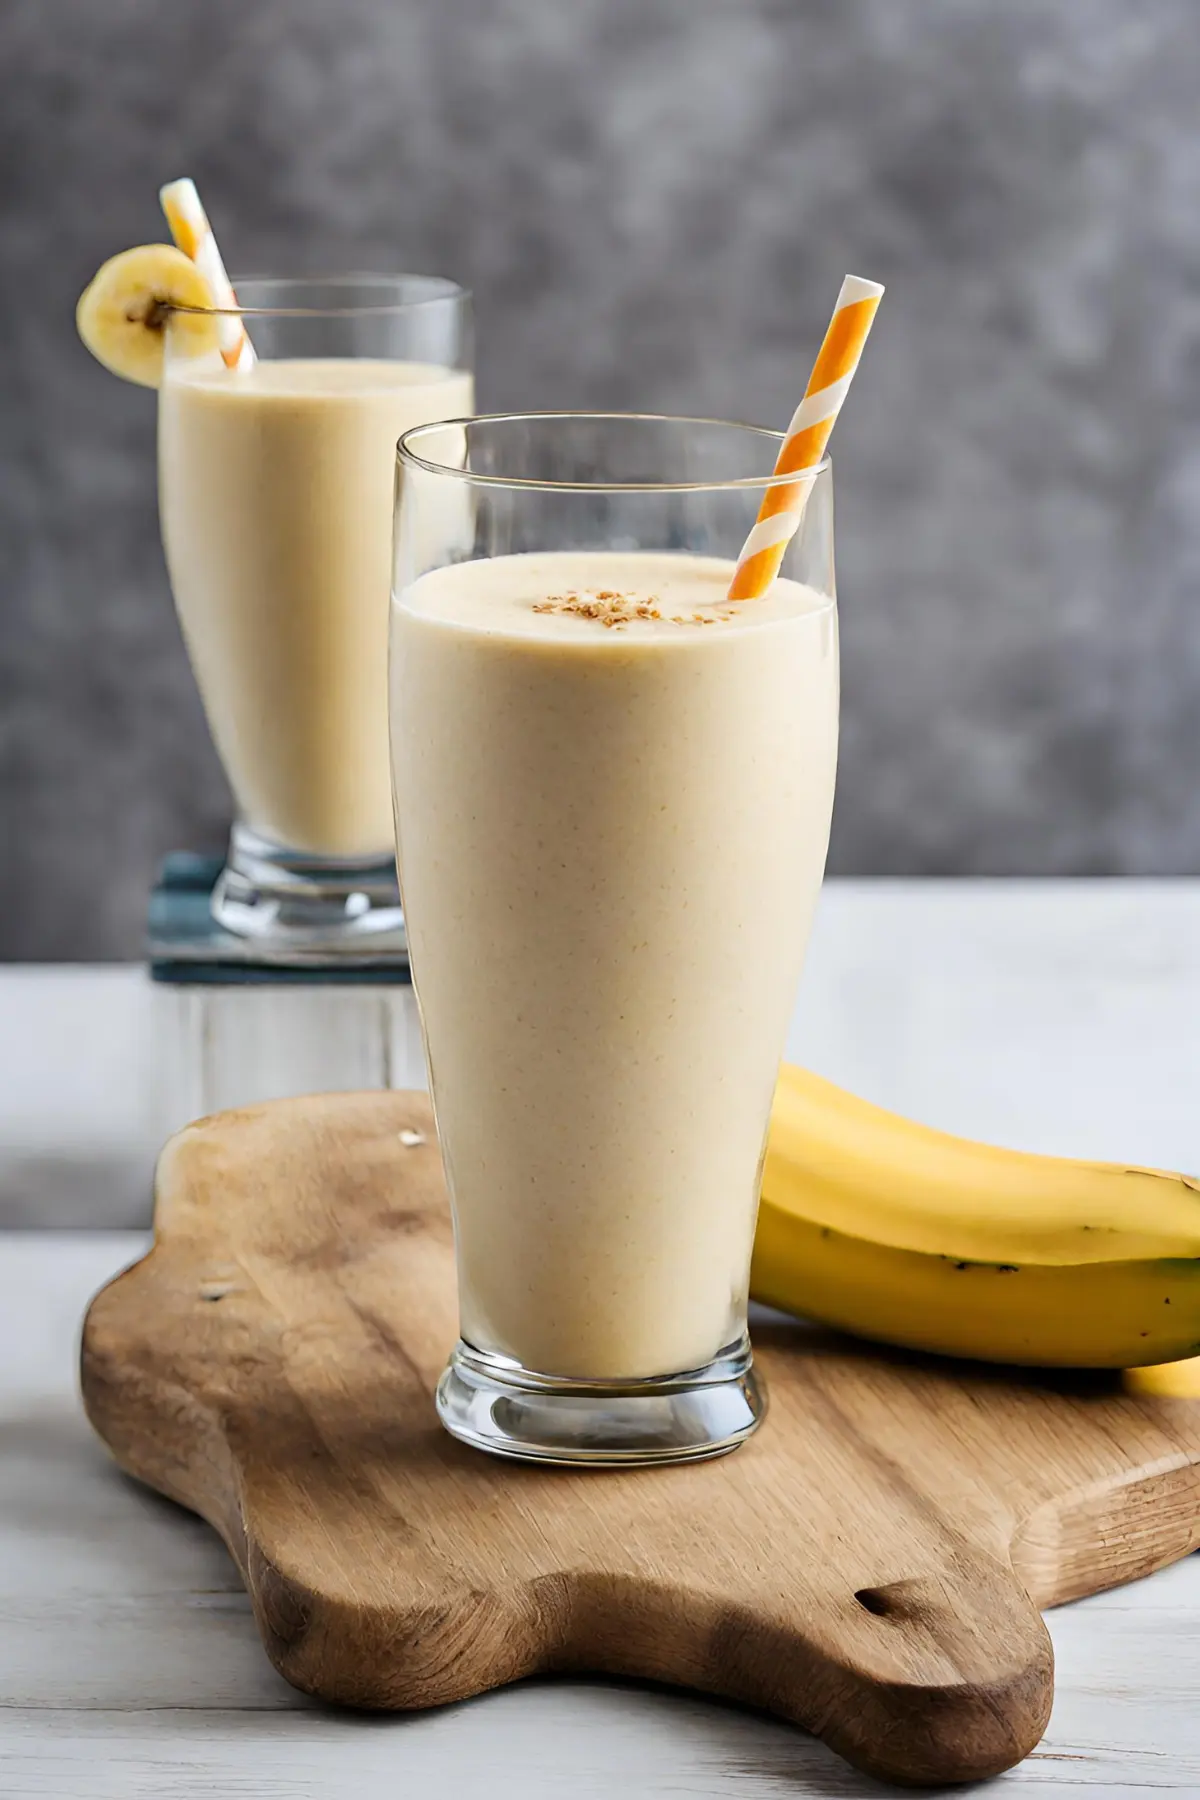 Making Banana Smoothies Ahead of Time